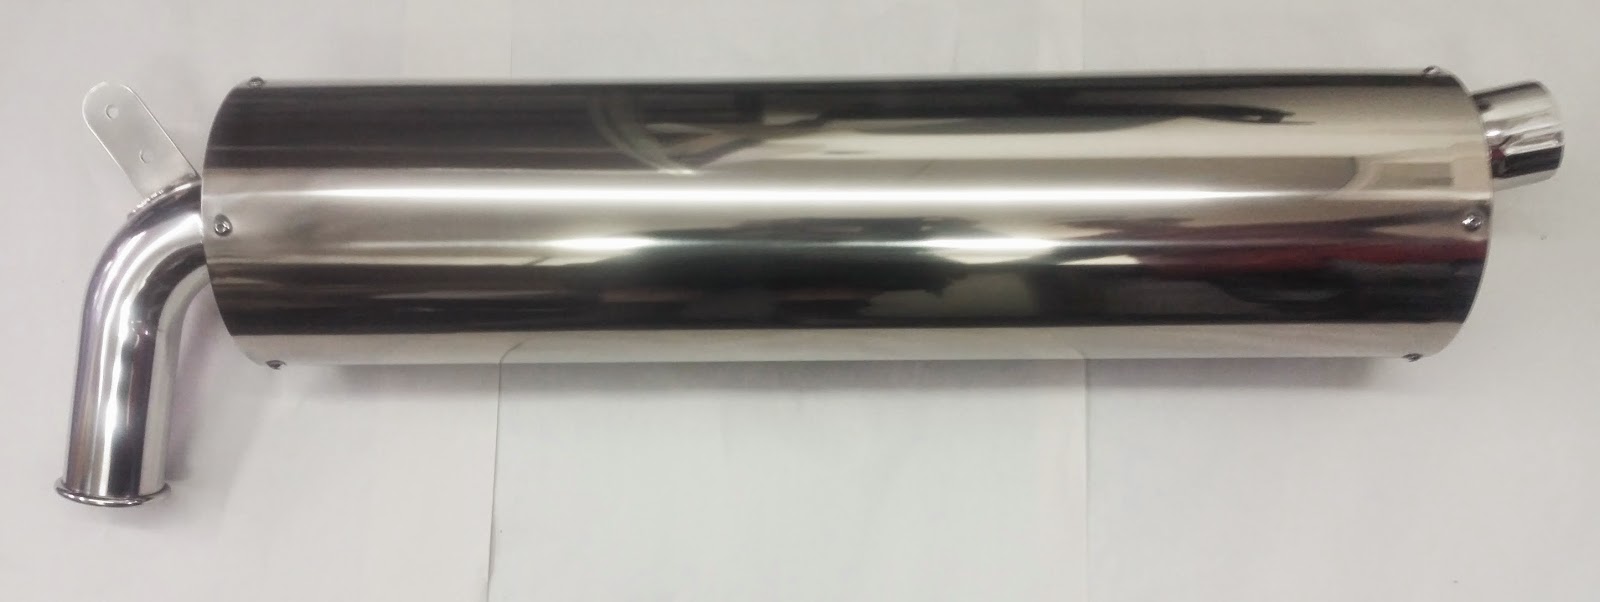 Freshly Polished Titanium Raceco Silencer and looking awesome!